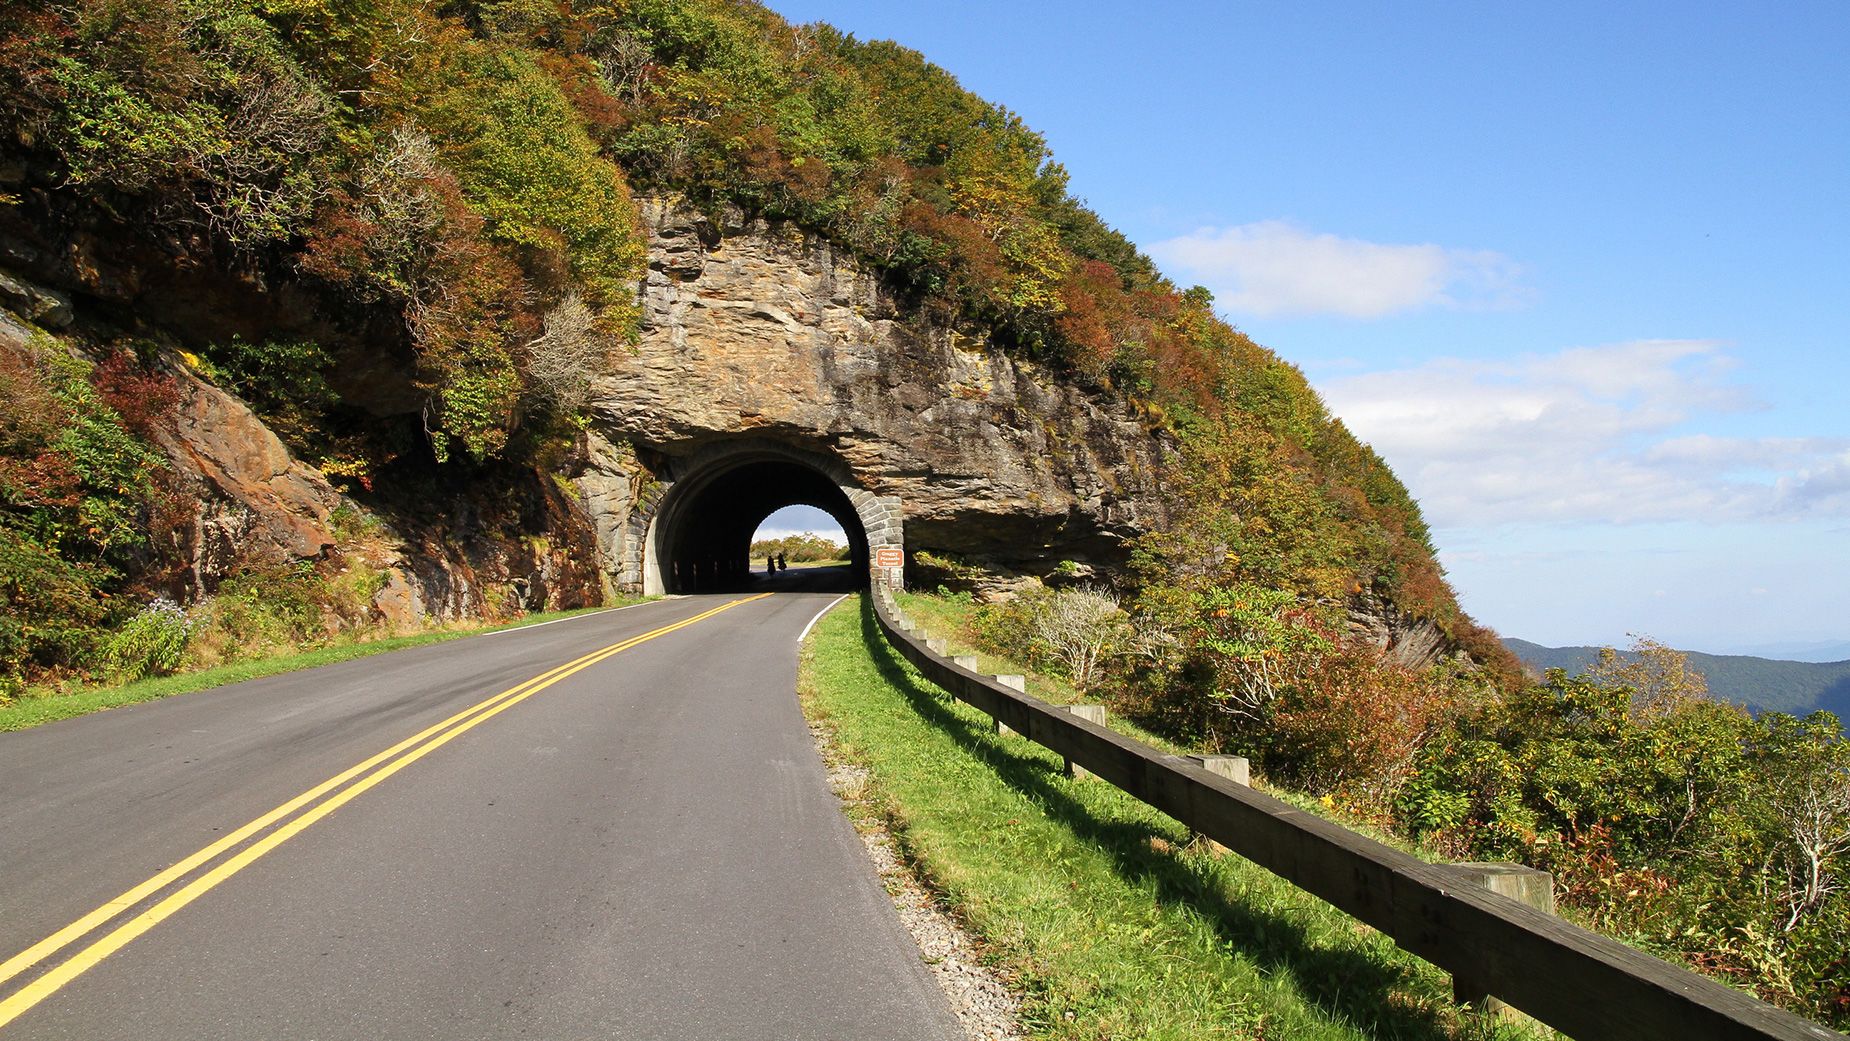 A section of the Blue Ridge Parkway a few miles south of Craggy Pinnacle Tunnel was closed on Monday.